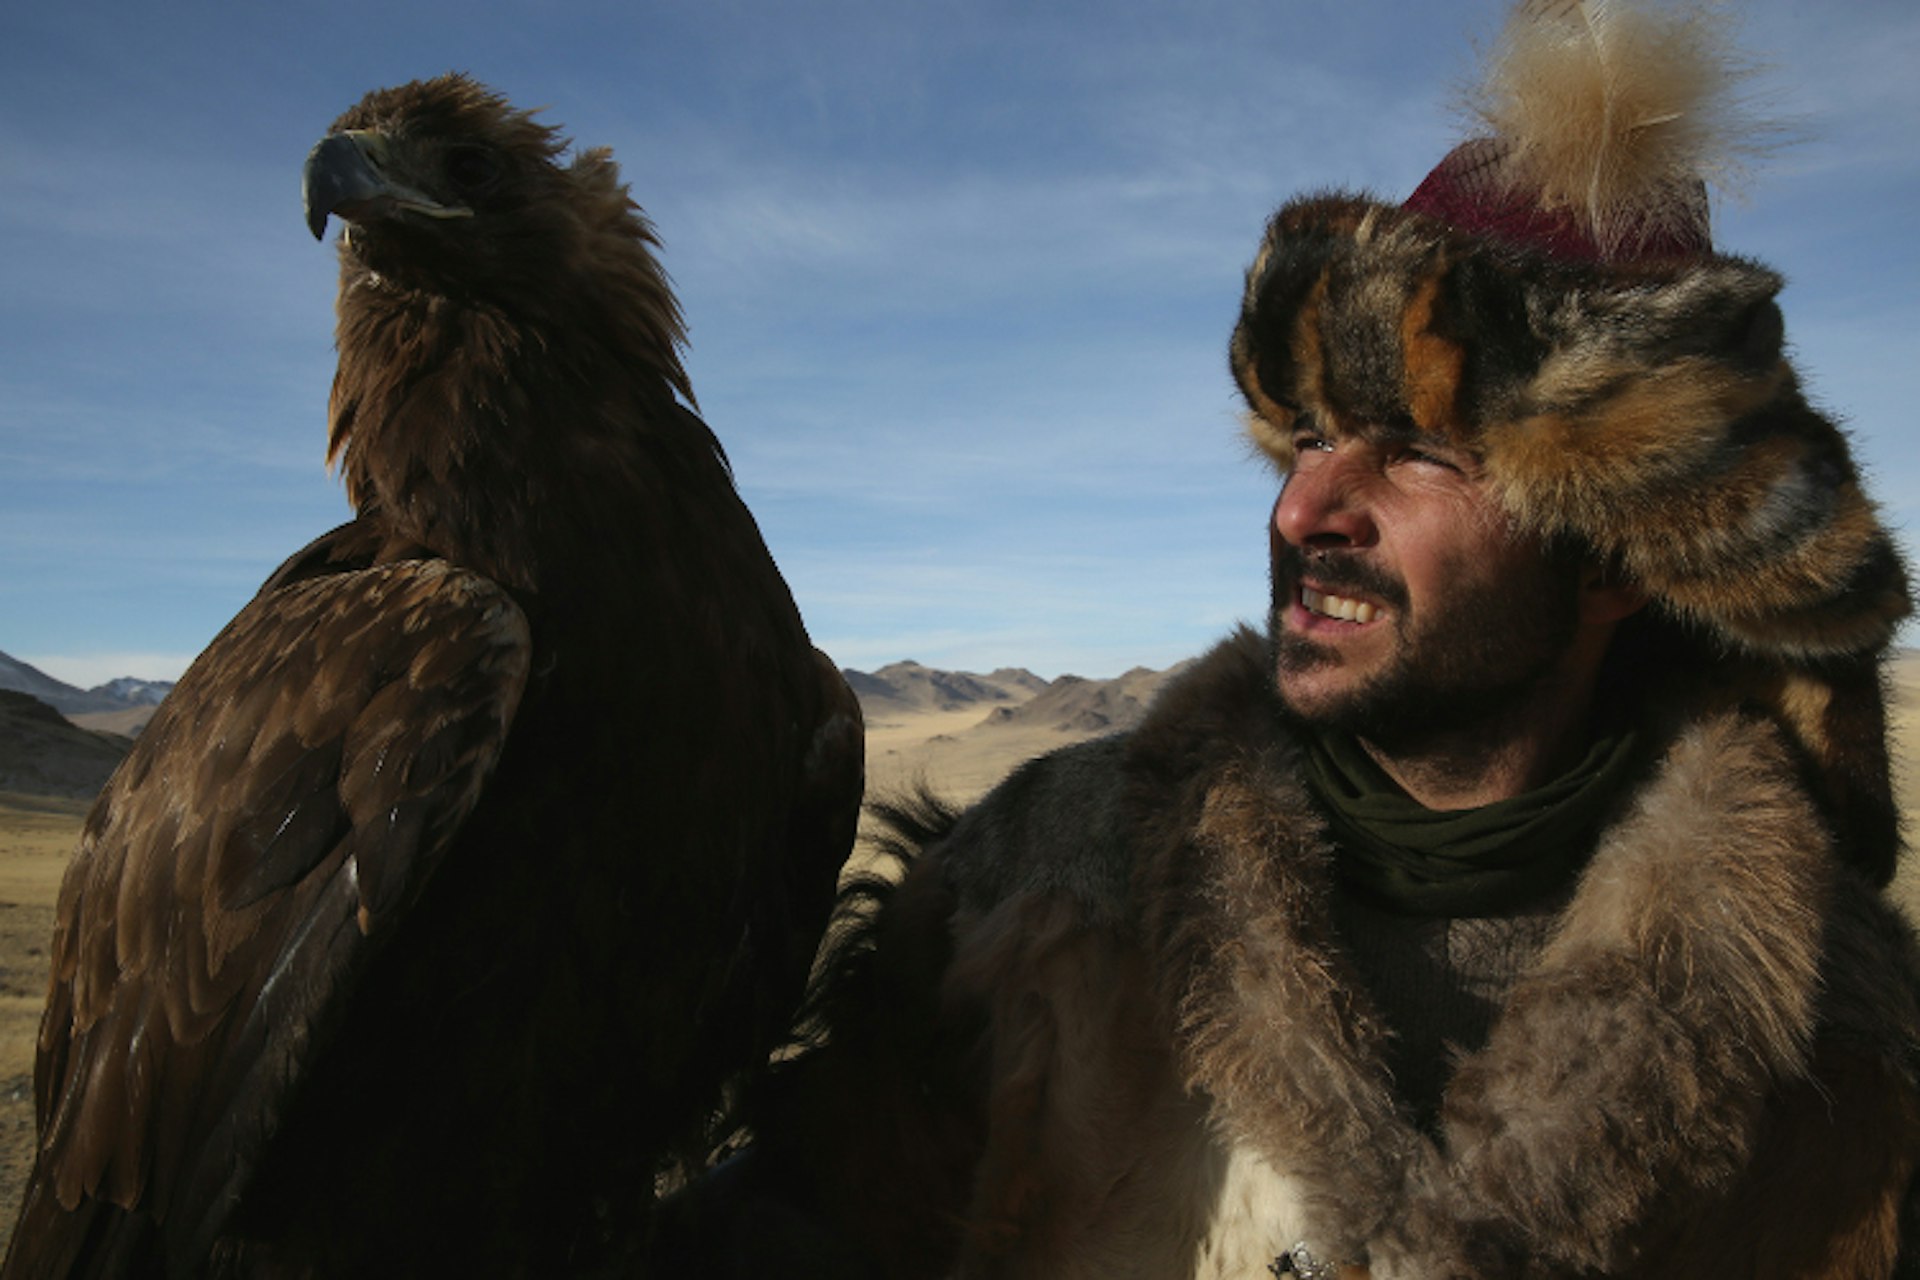 Bayan Olgii, Mongolia: Hazen Audel with a golden eagle, wearing traditional hunting clothes. (Photo Credit: National Geographic Channels/Samantha Tollworthy)